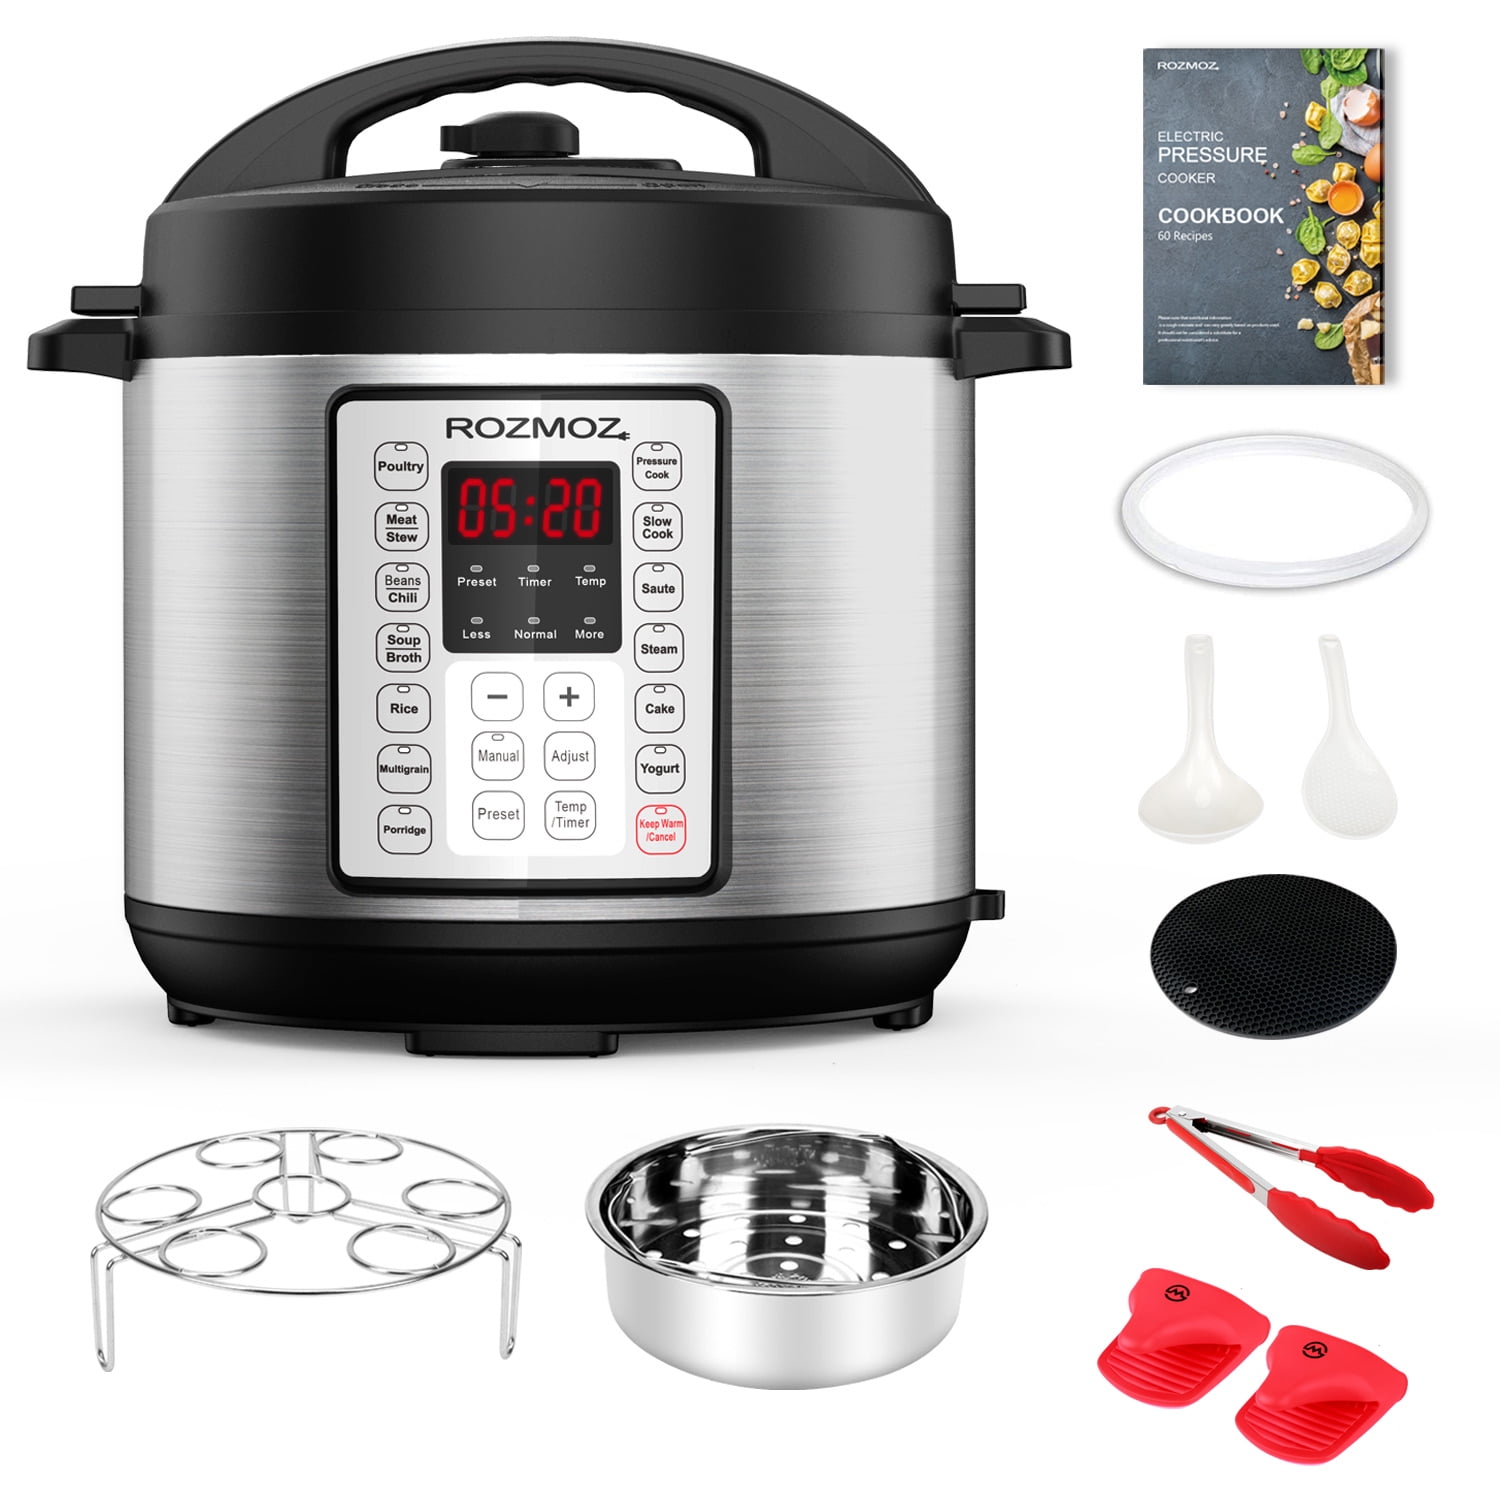 How to clean an Instant Pot electric pressure cooker - Reviewed